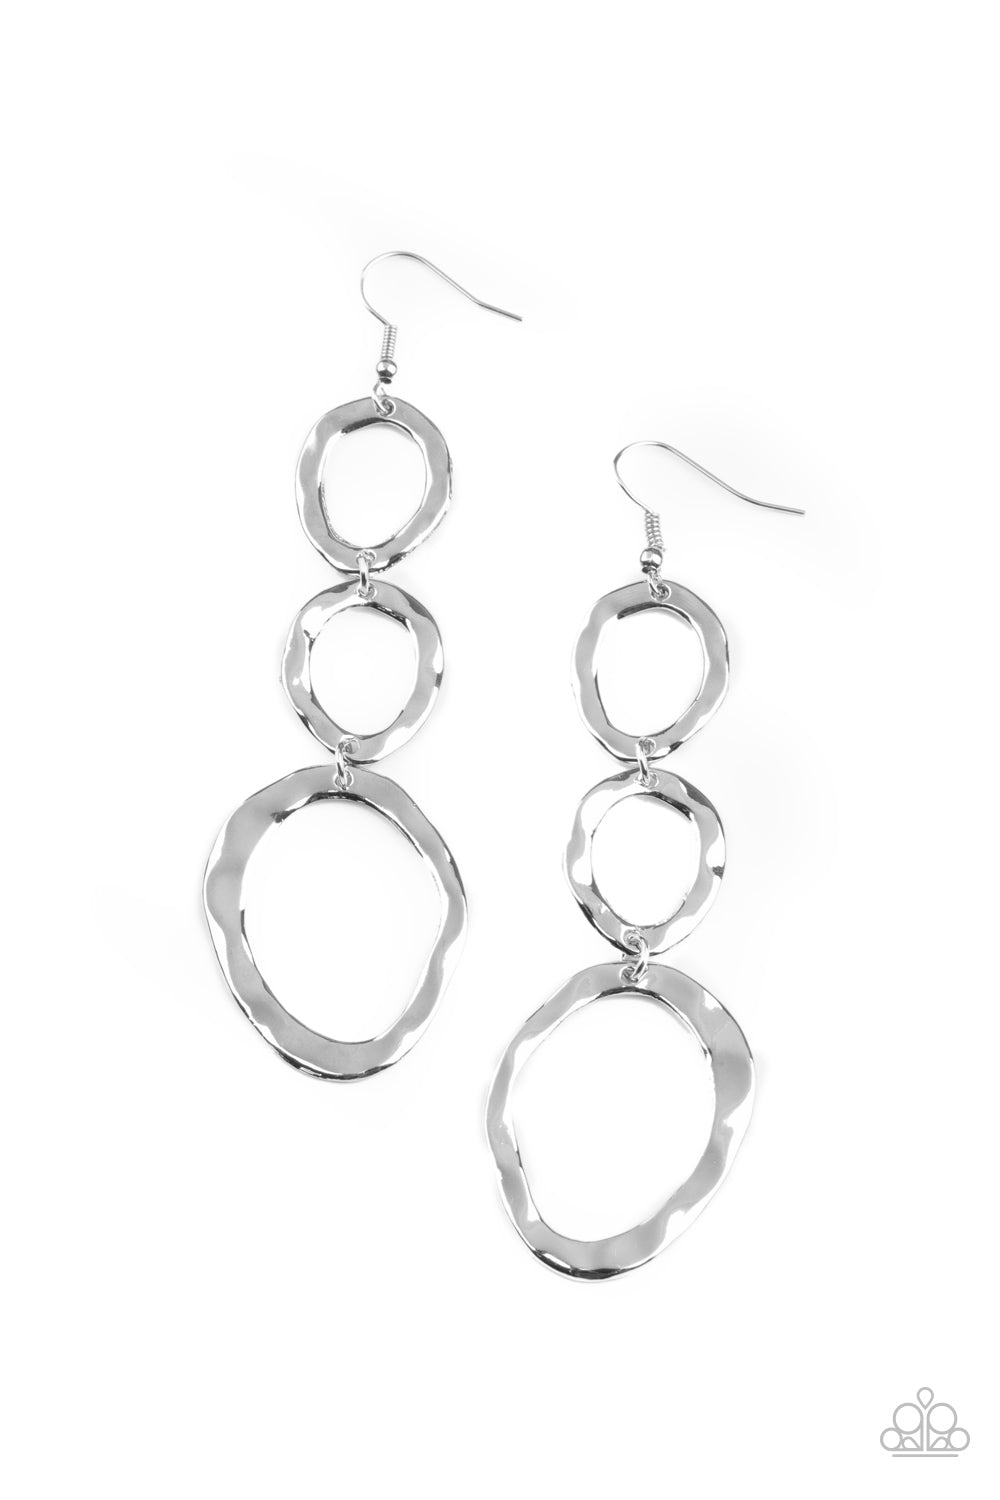 So OVAL It! Silver Paparazzi Earring Cashmere Pink Jewels